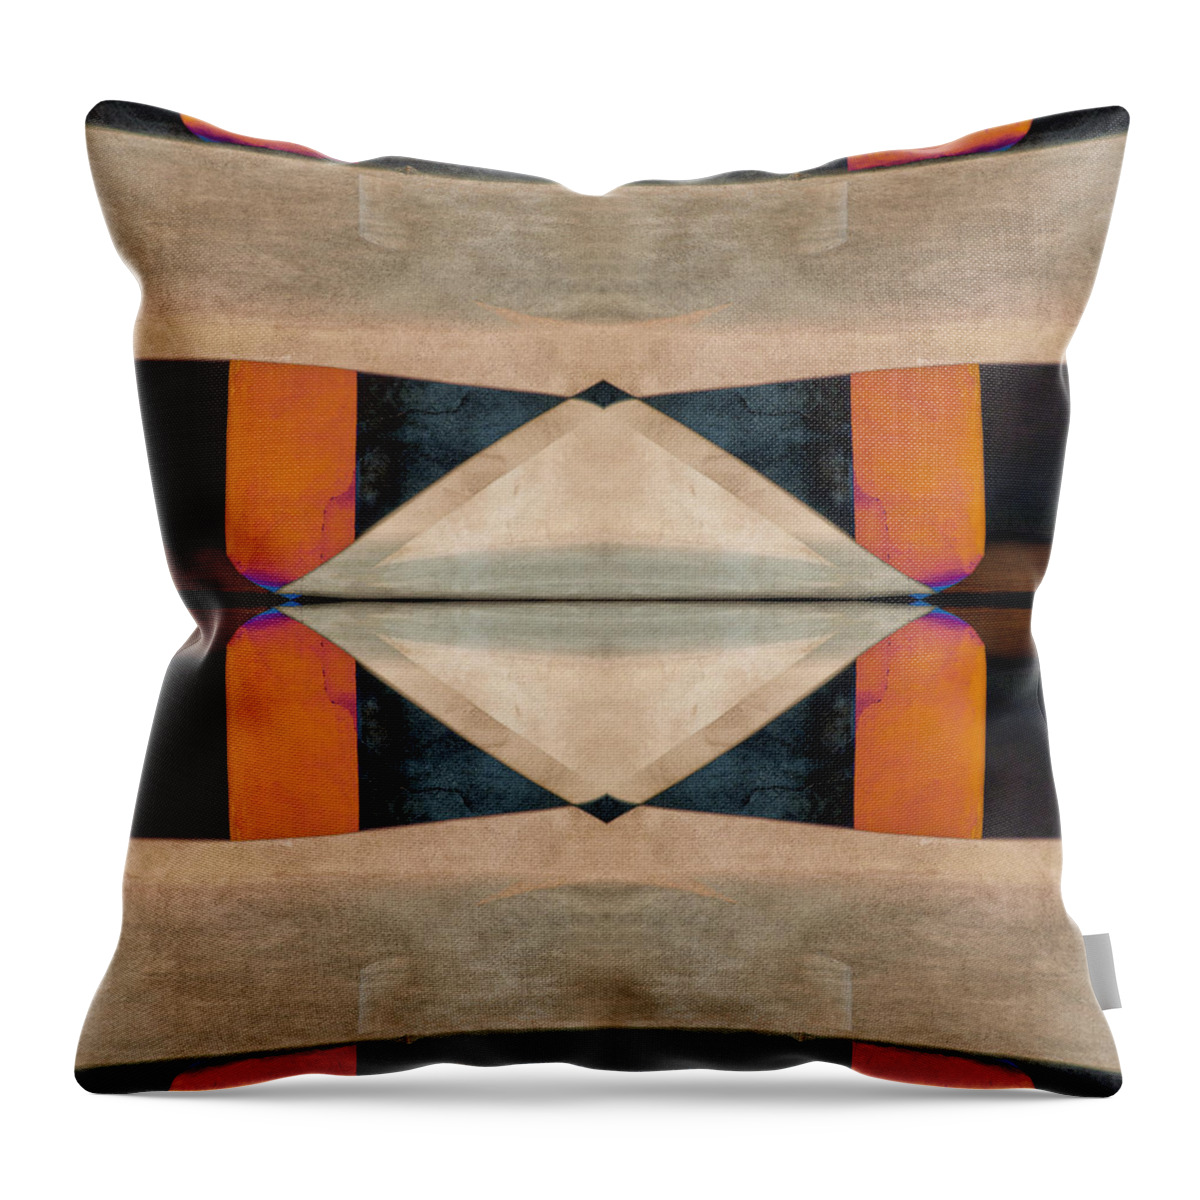 Stone Canyons Throw Pillow featuring the photograph Stone Canyons Santa Fe Series 4 by Carol Leigh